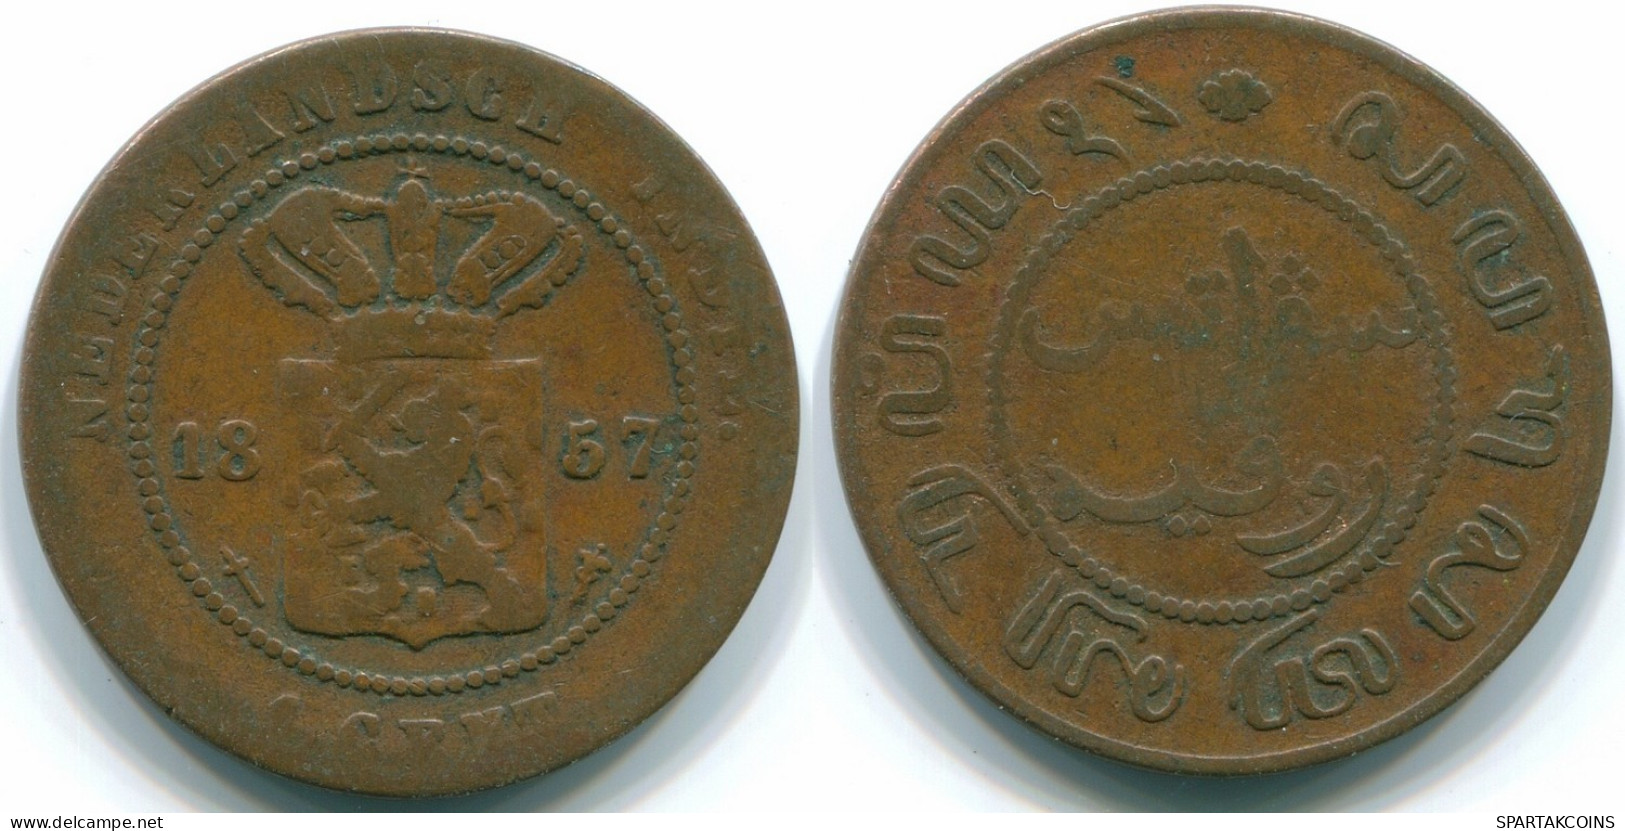 1 CENT 1857 NETHERLANDS EAST INDIES INDONESIA Copper Colonial Coin #S10041.U.A - Indes Néerlandaises